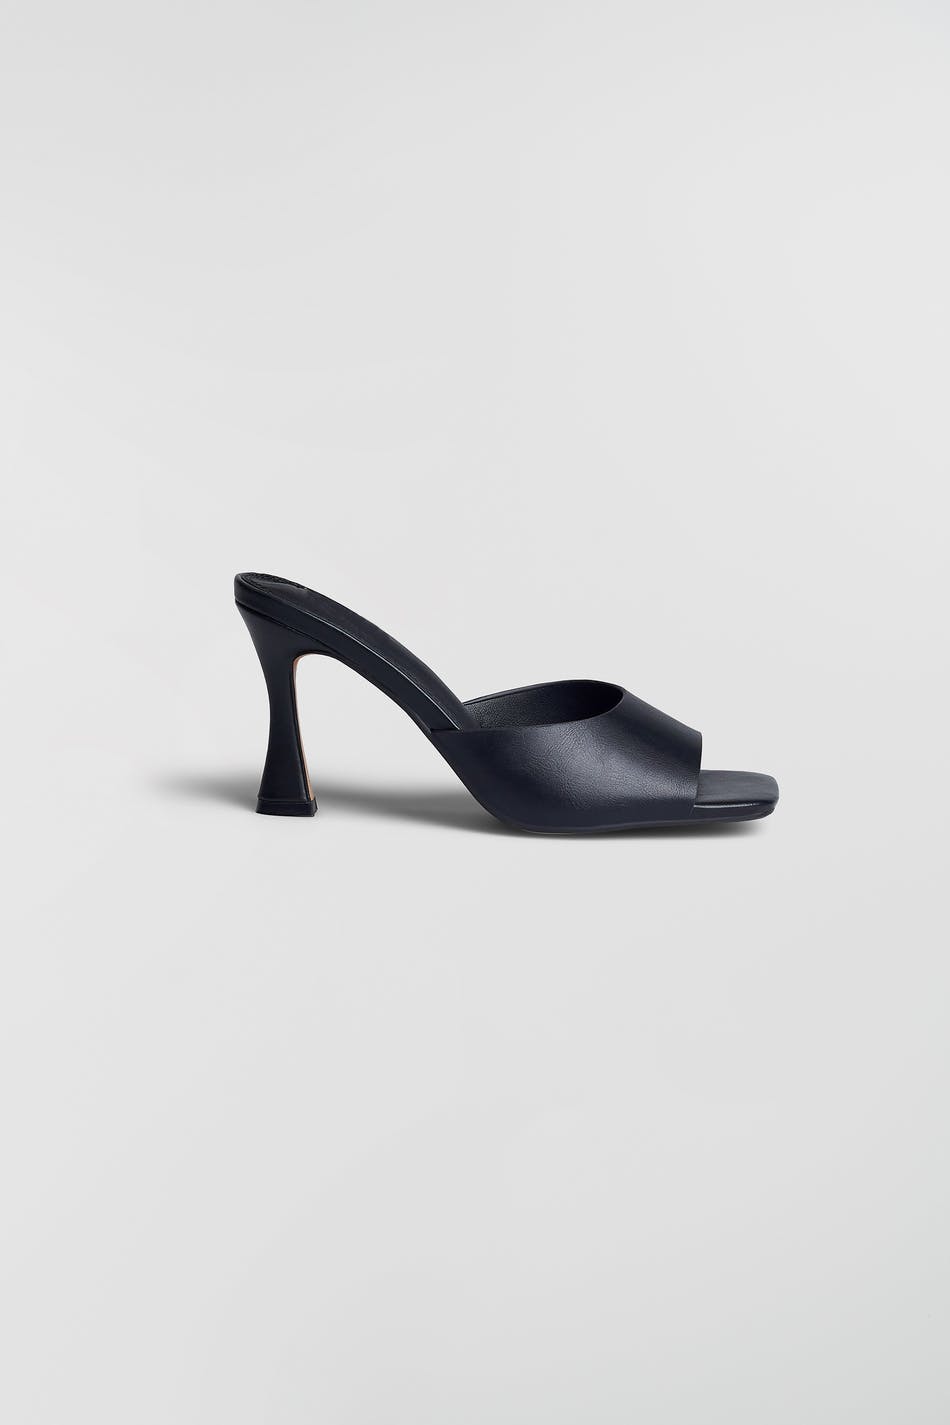 Gina Tricot - Ines high heel sandals